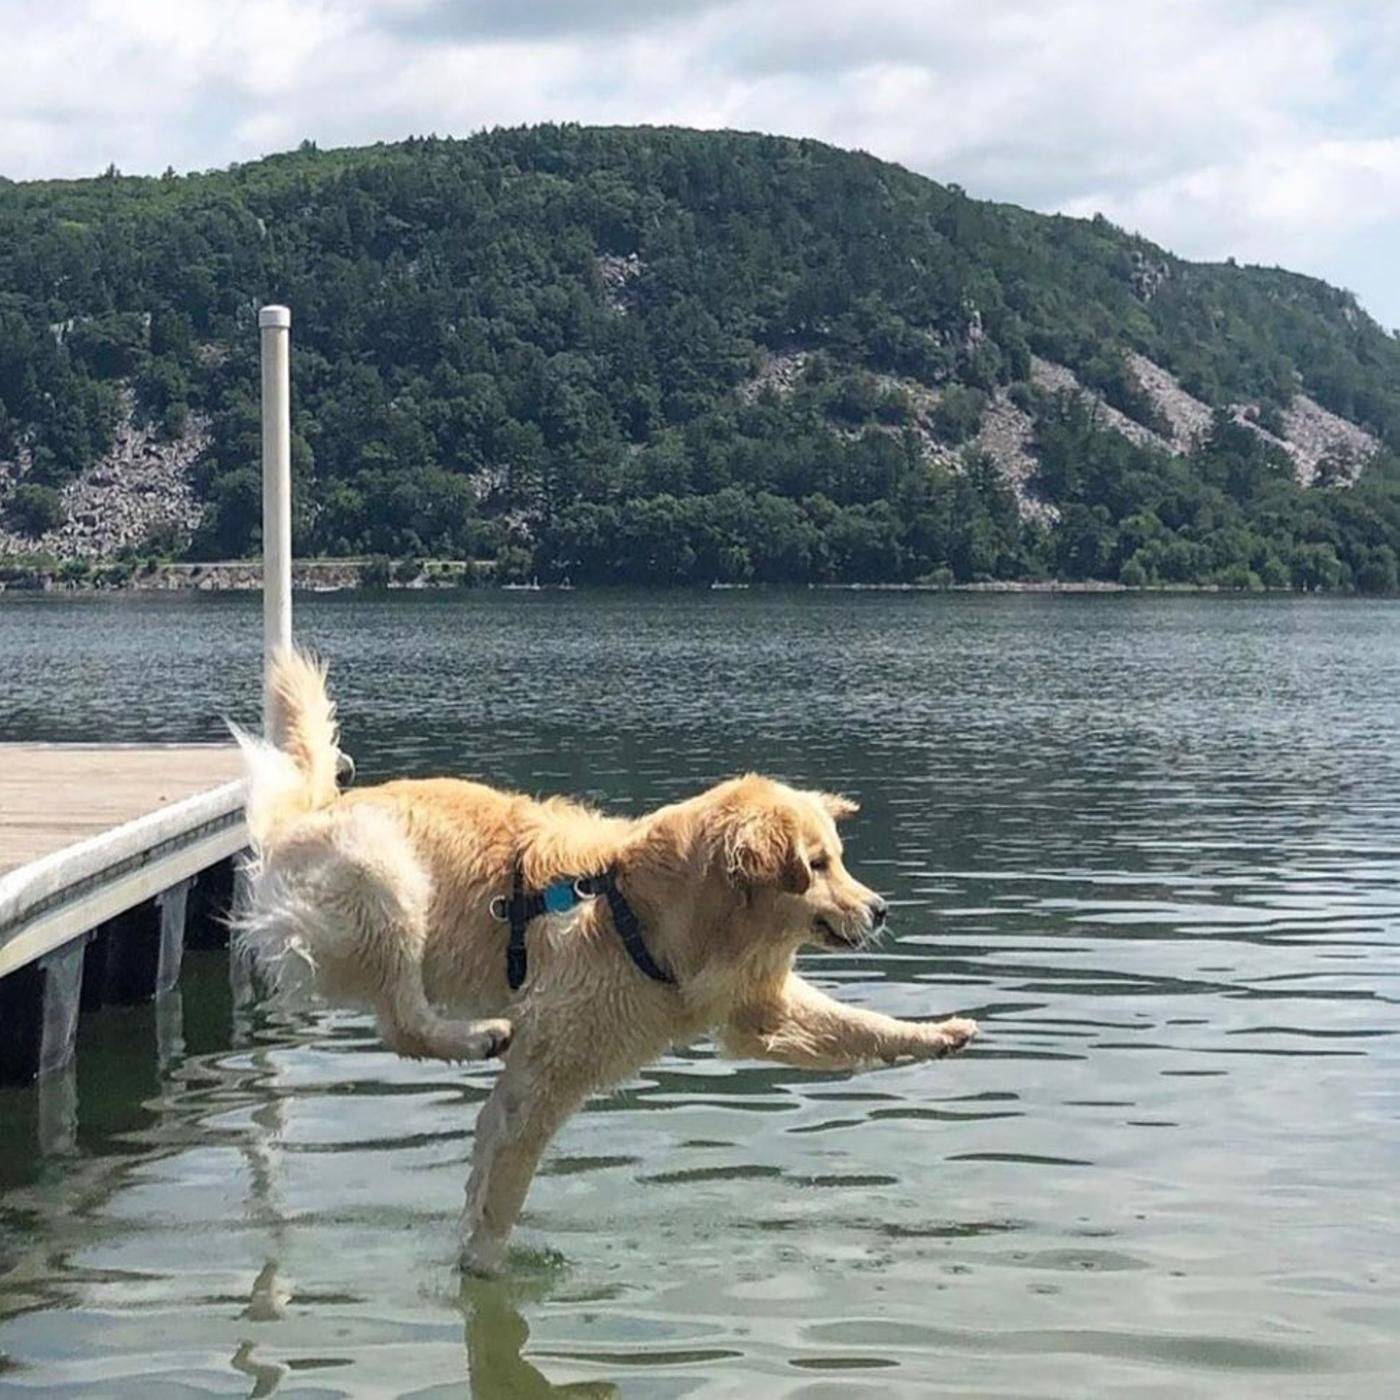 An elegant entry into the water or an attempt to walk on the water like dry land - Dog, Bounce, Bathing, Golden retriever, Pier, Milota, From the network, Bathing